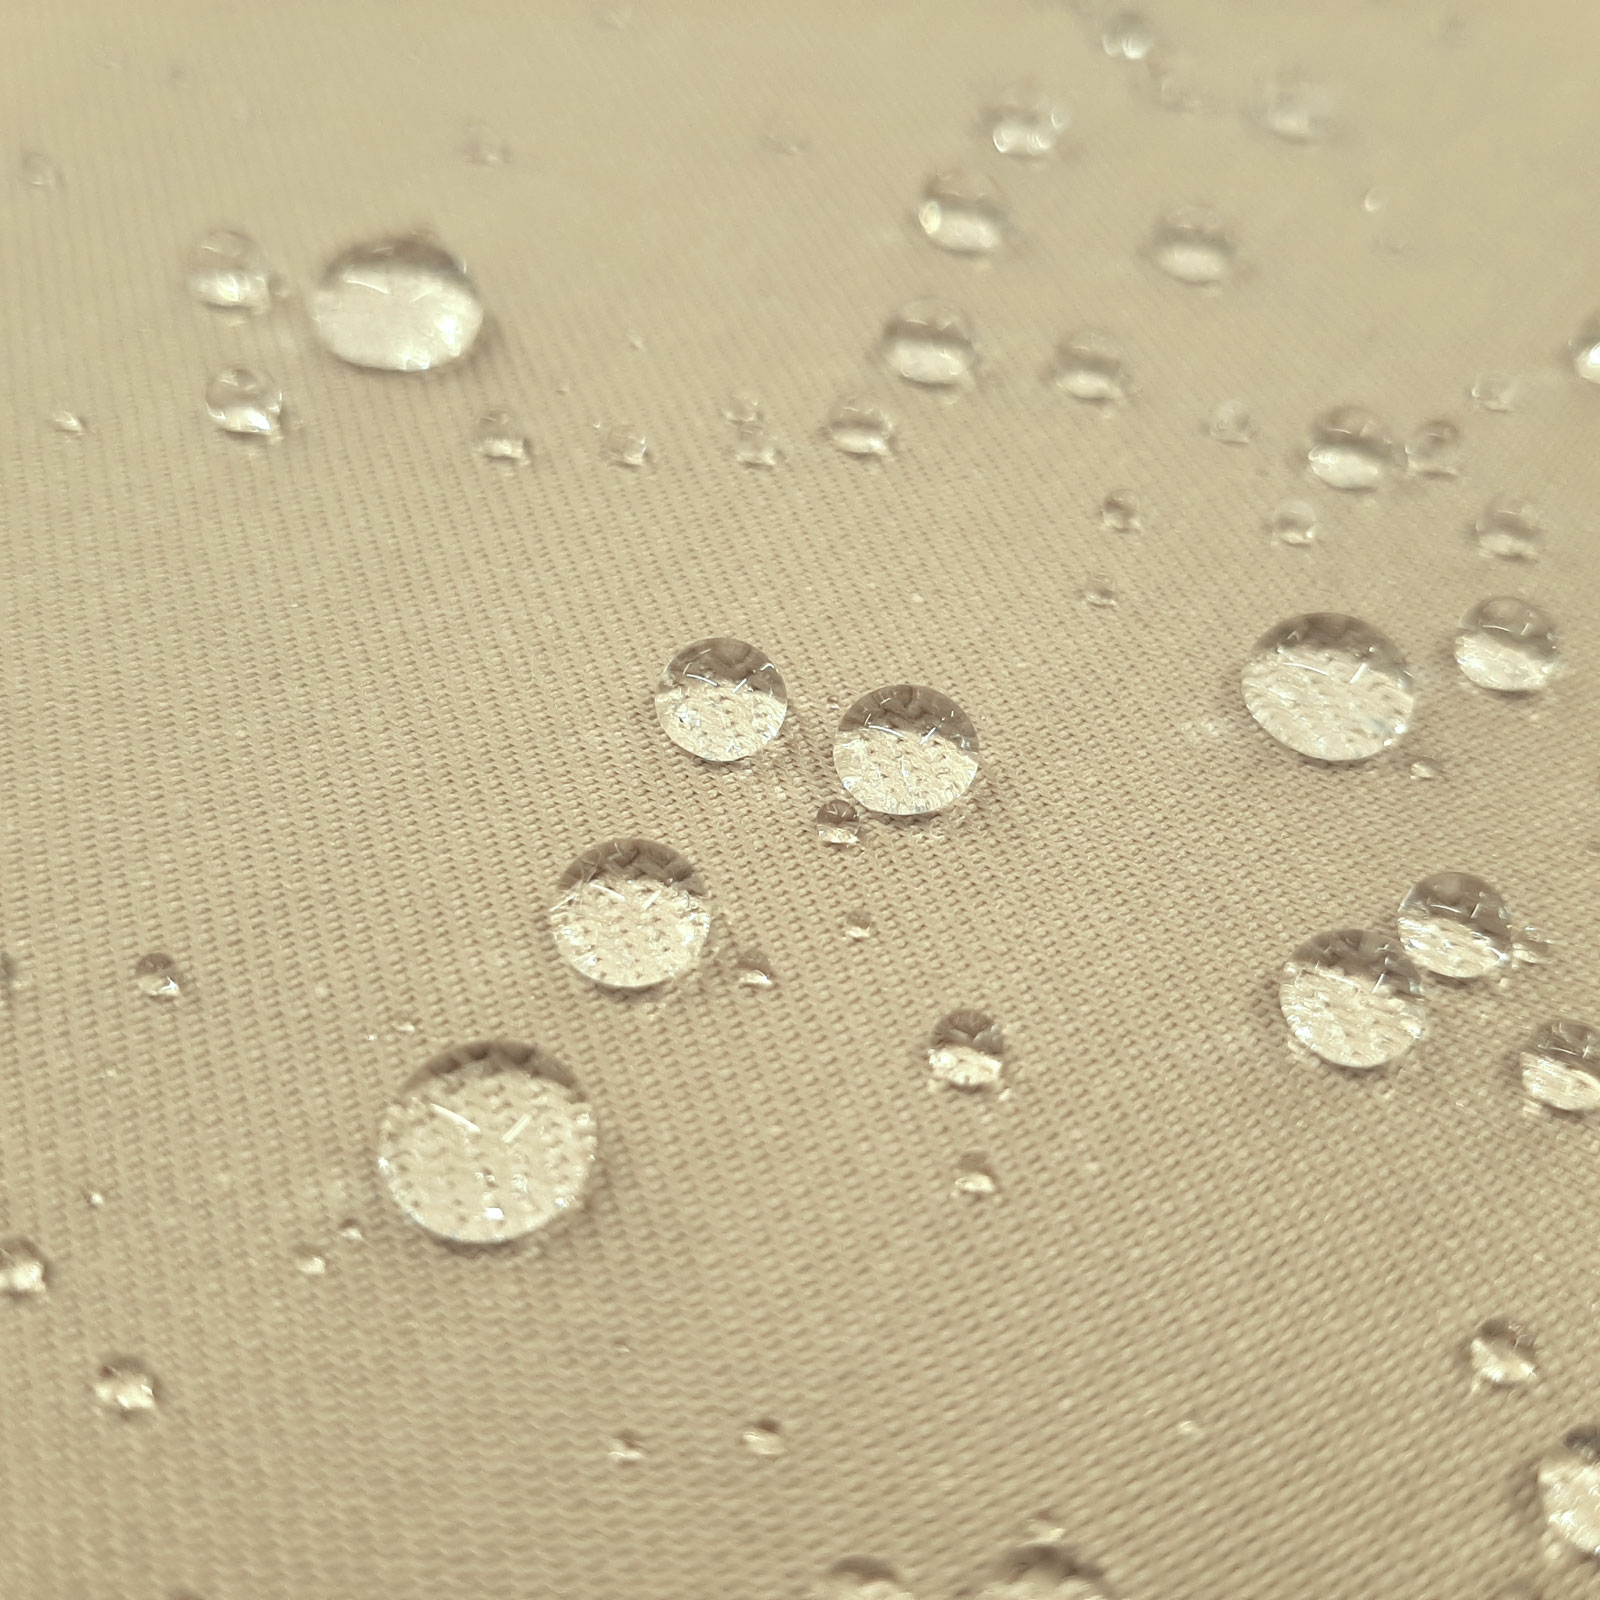 Phytex - abrasion resistant & water repellent - Khaki